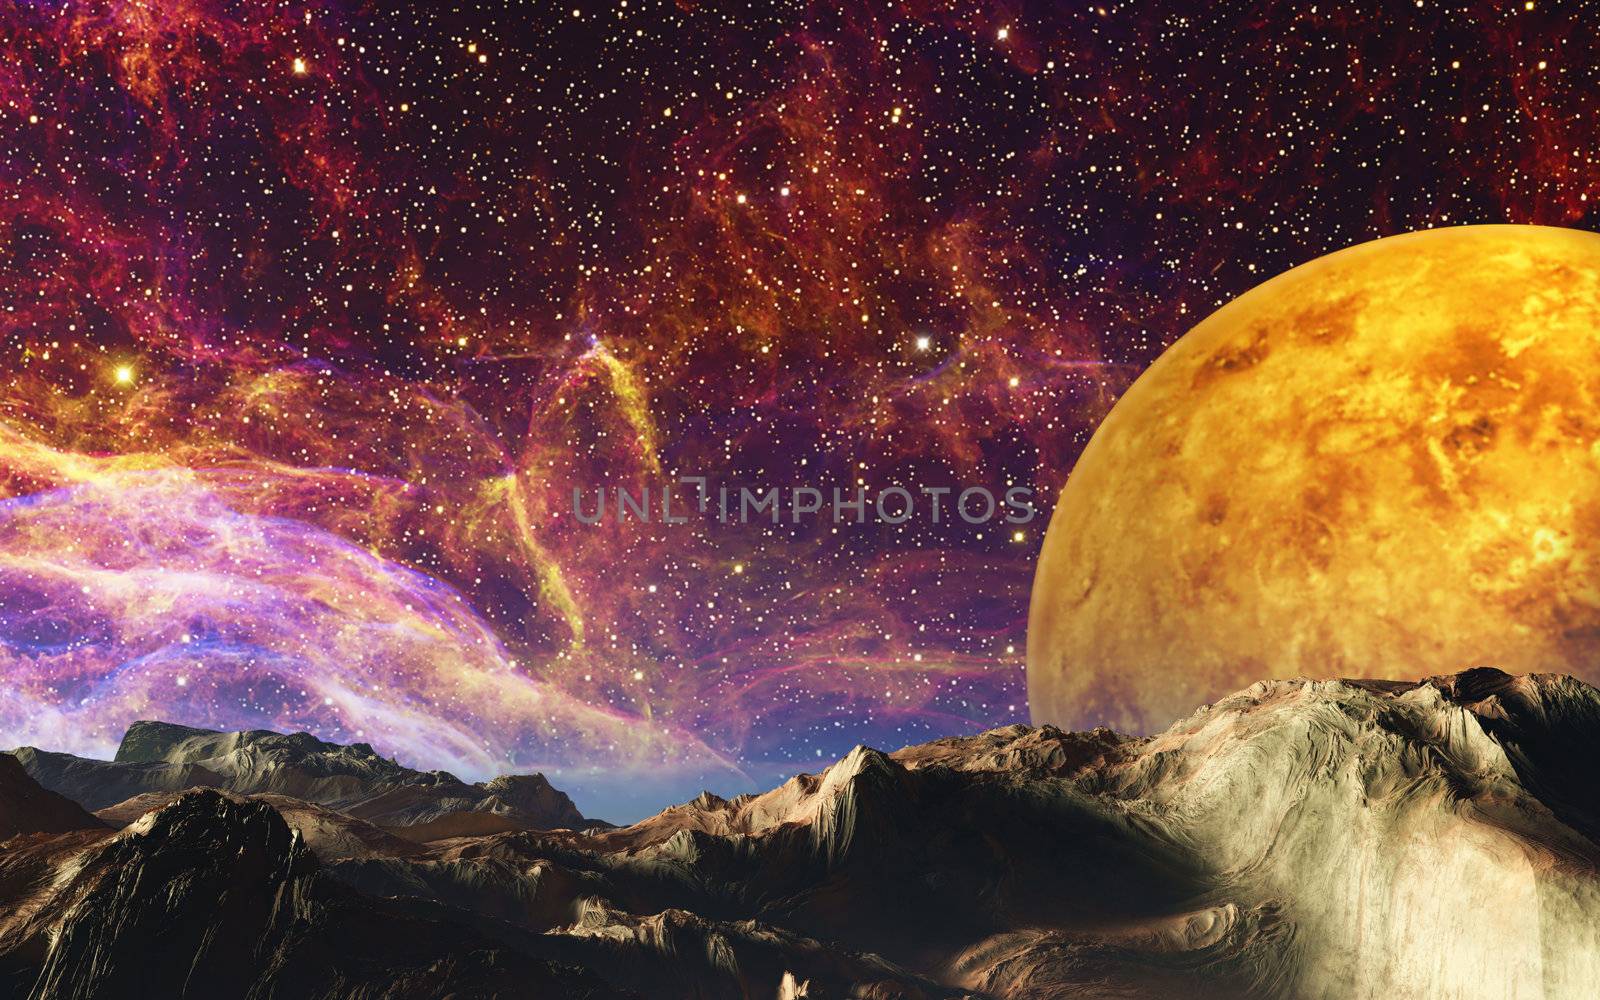 This image shows a landscape from a unknown planet with nebulae